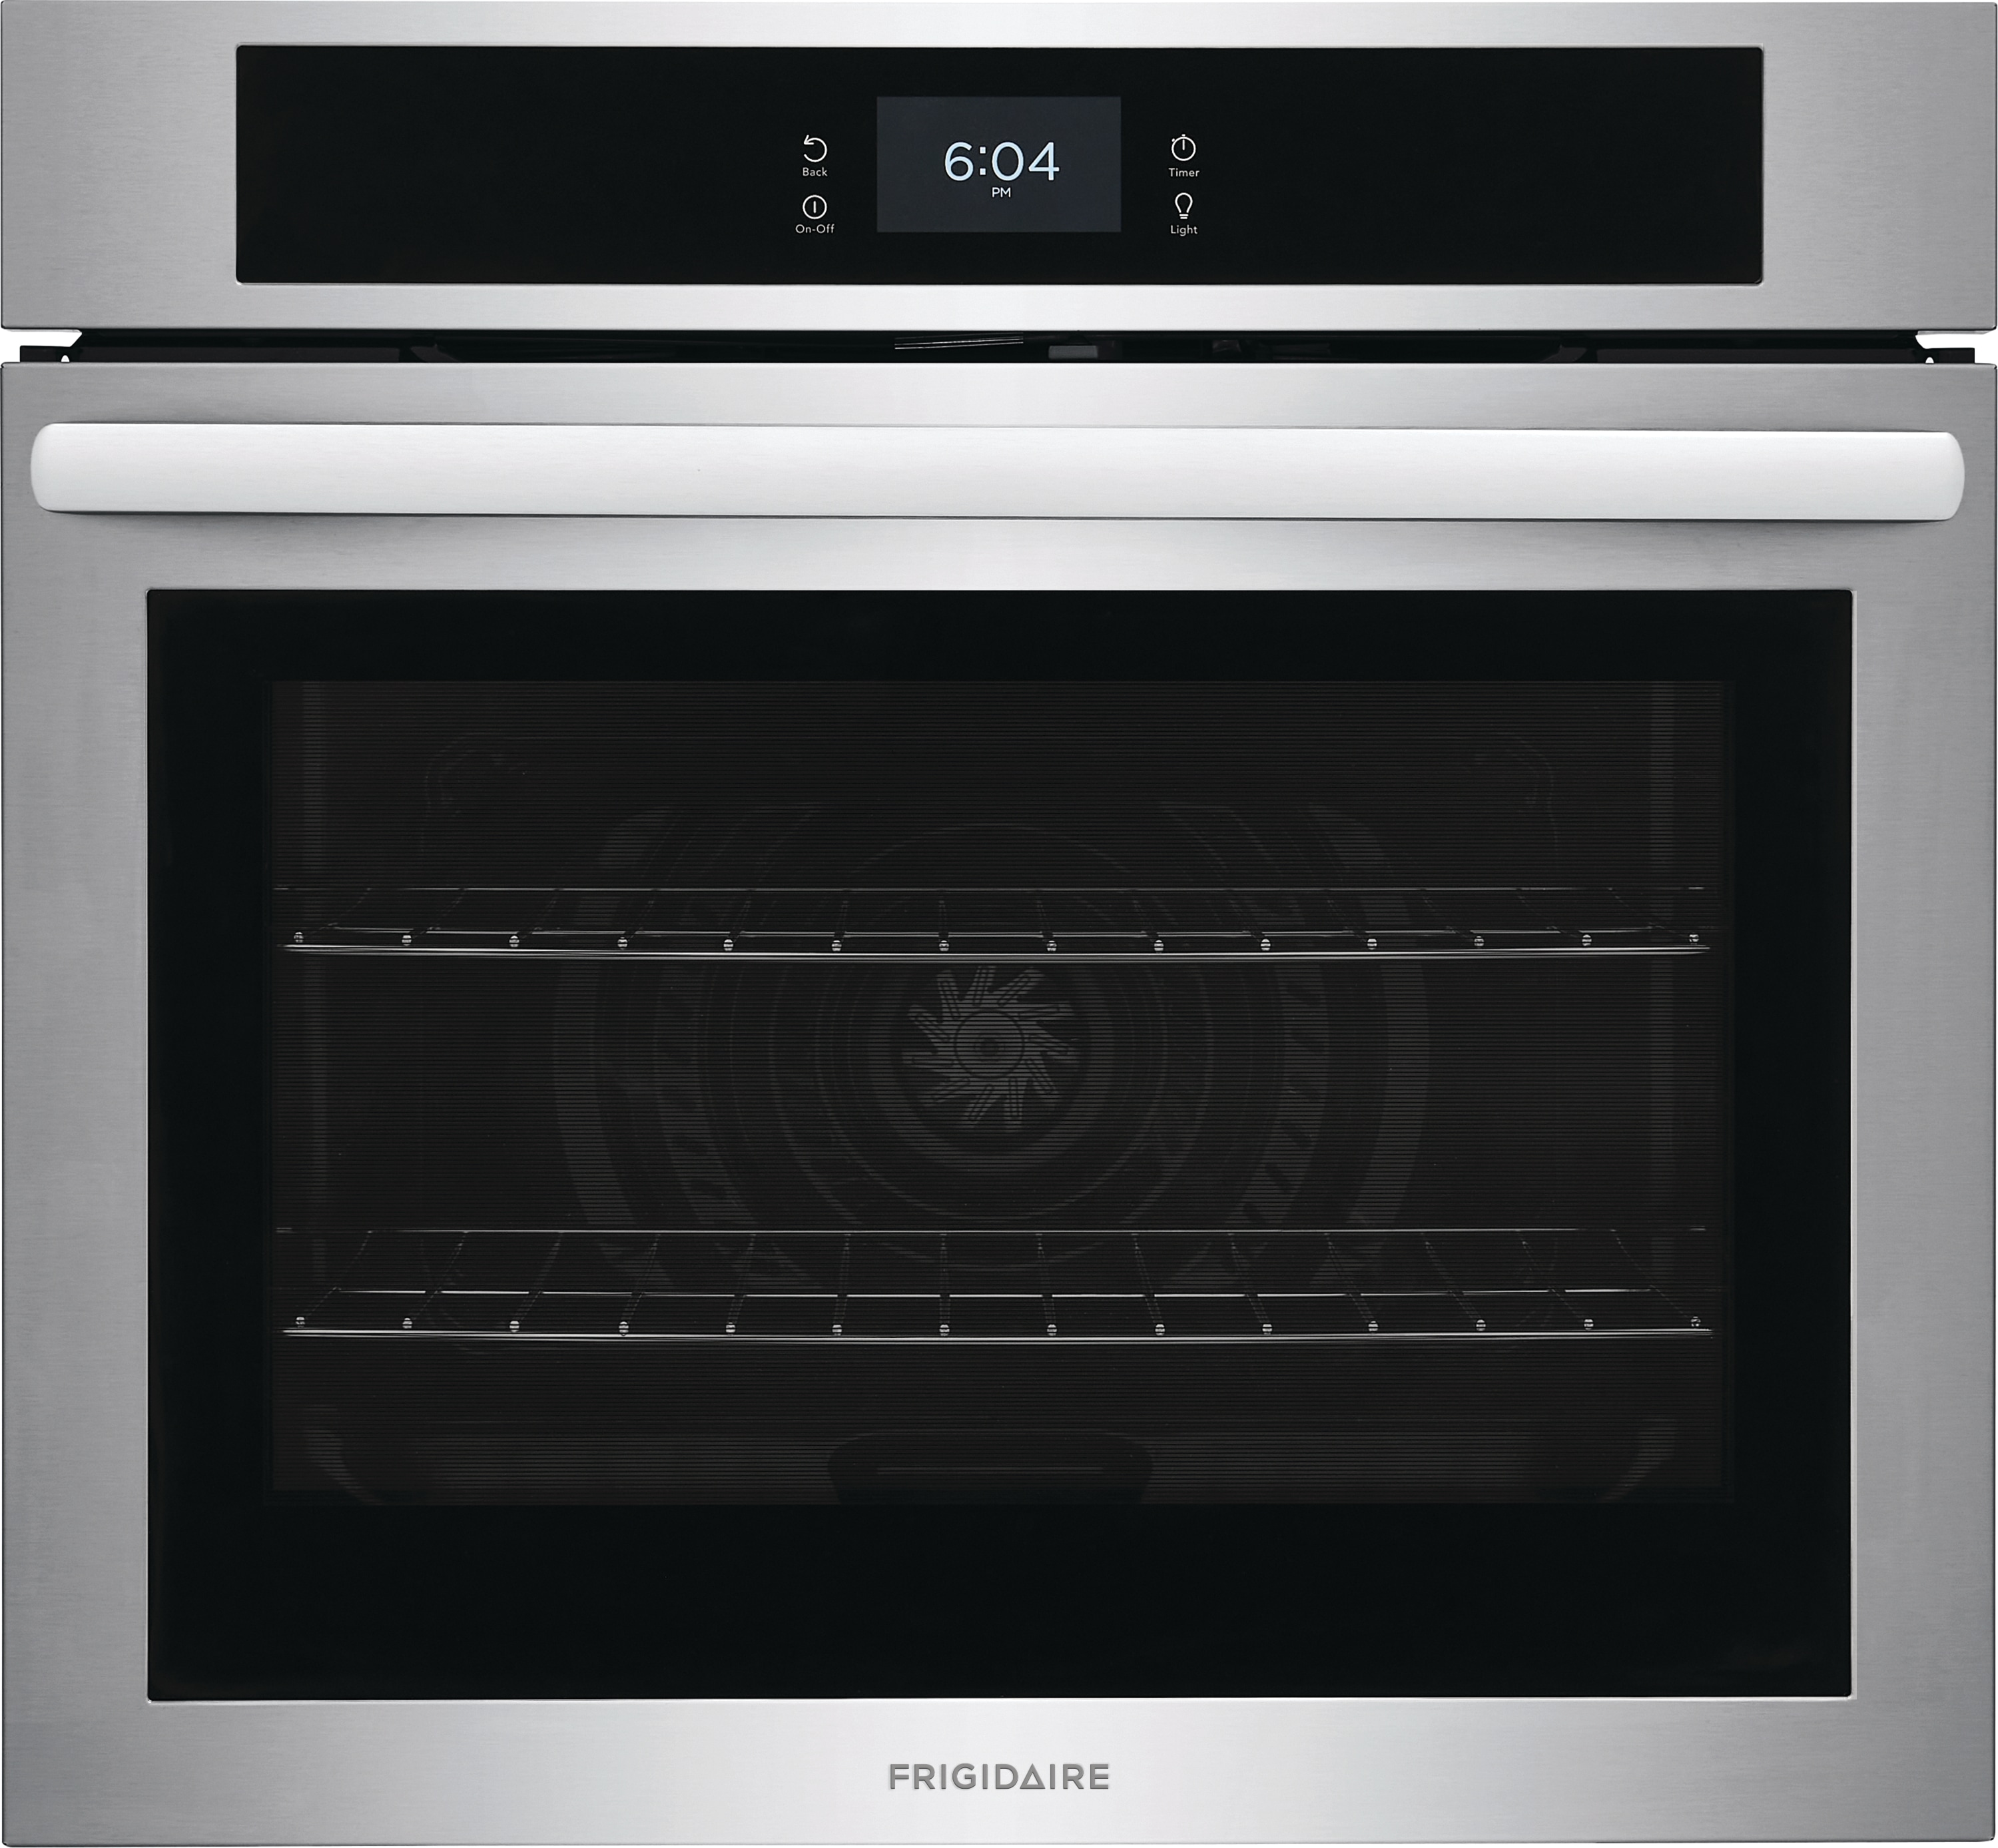 I Can't Install My Frigidaire Oven Rack